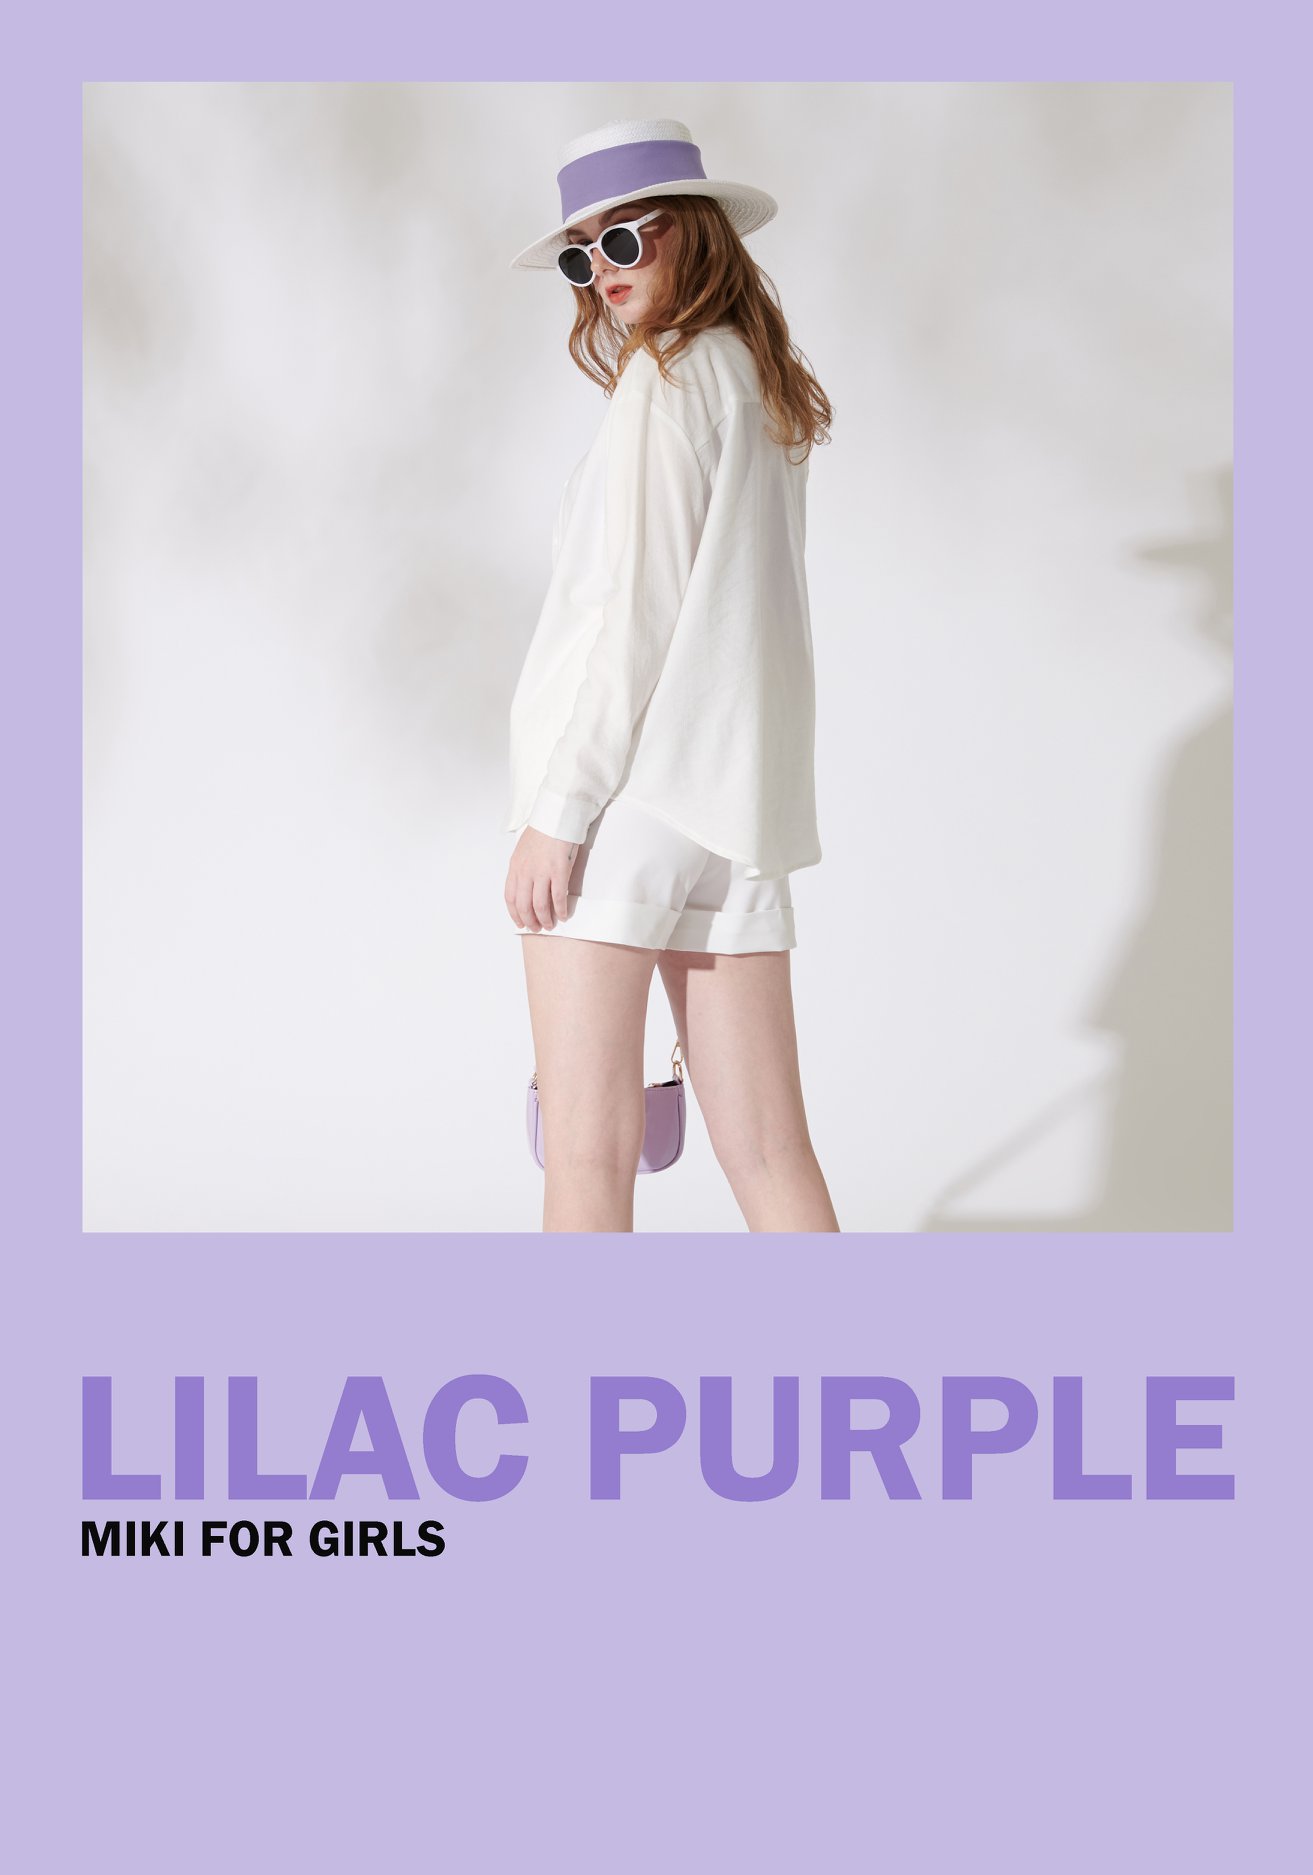 MIKI FOR GIRLS – LILAC PURPLE